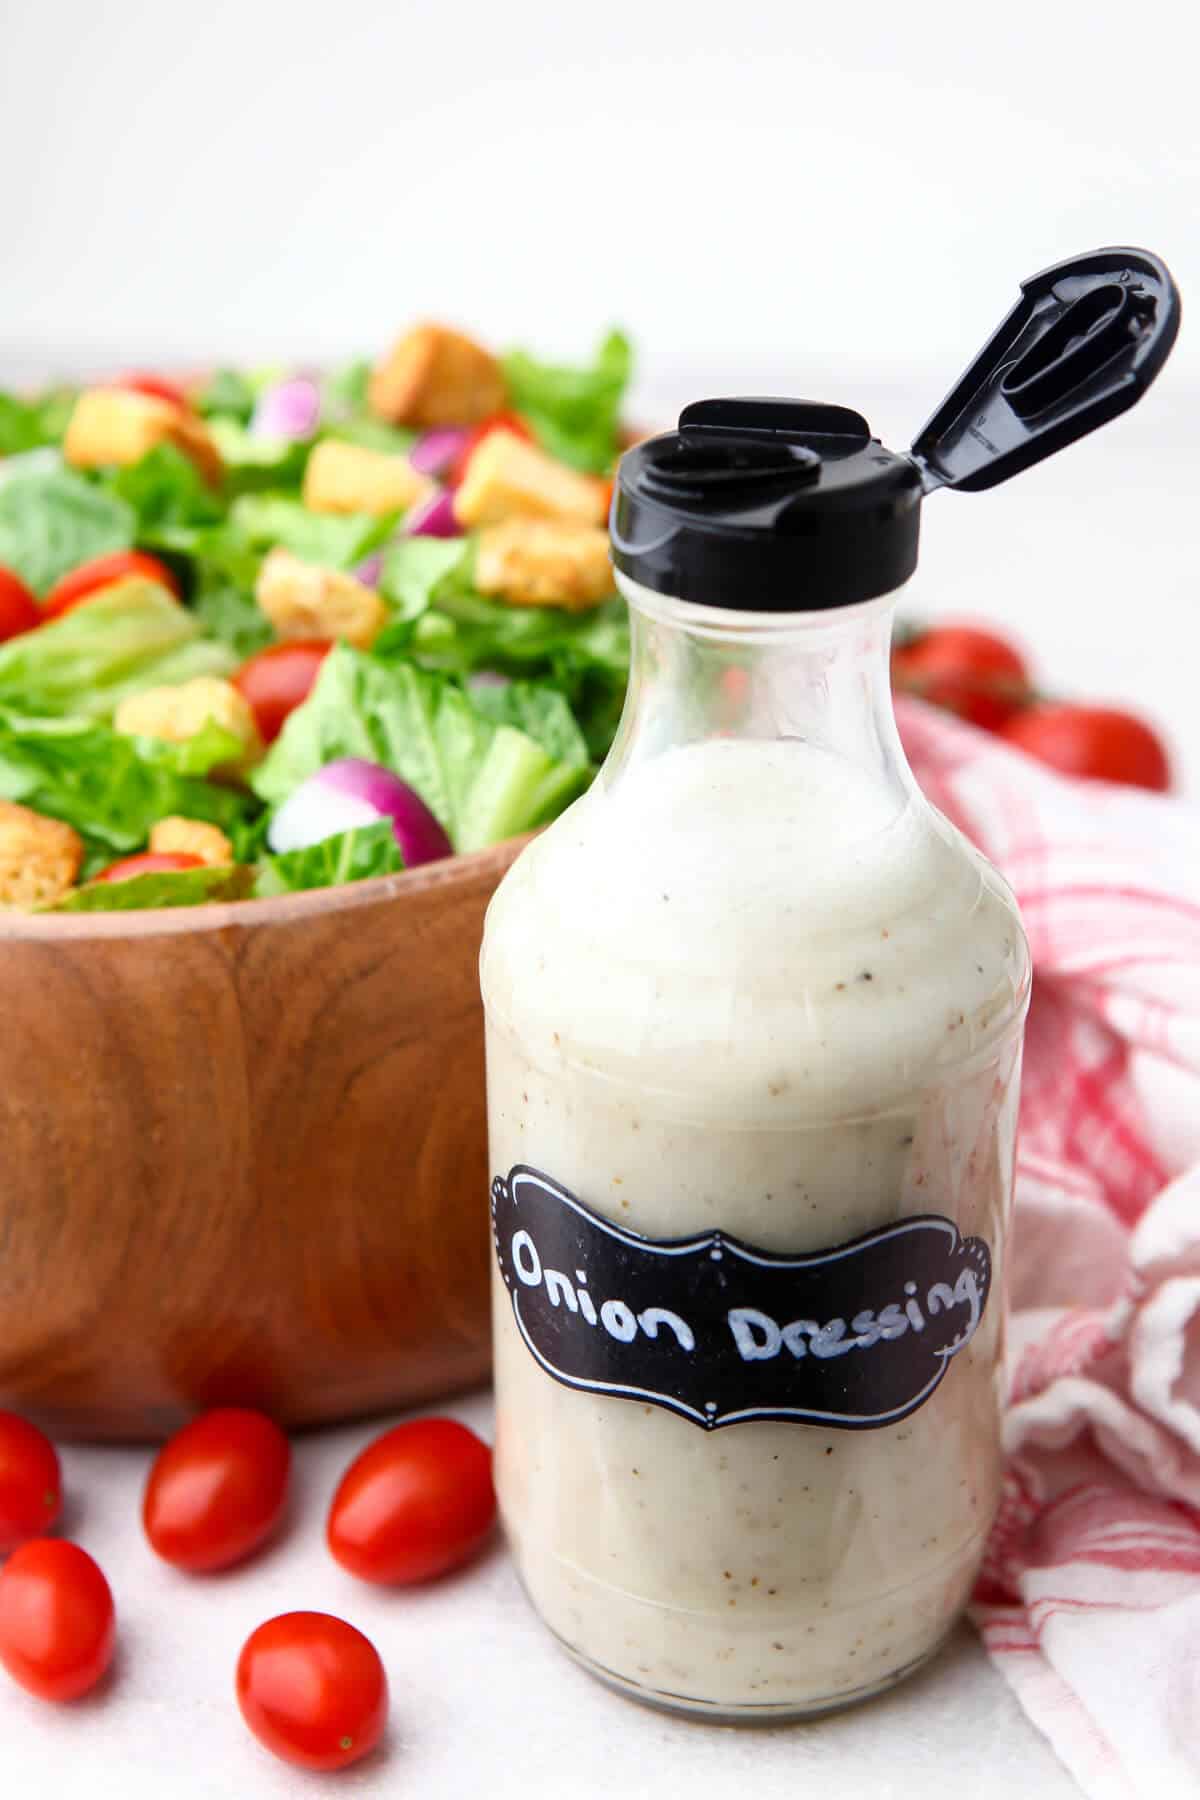 Vegan sweet onion dressing in a bottle in front of a wooden bowl filled with salad.